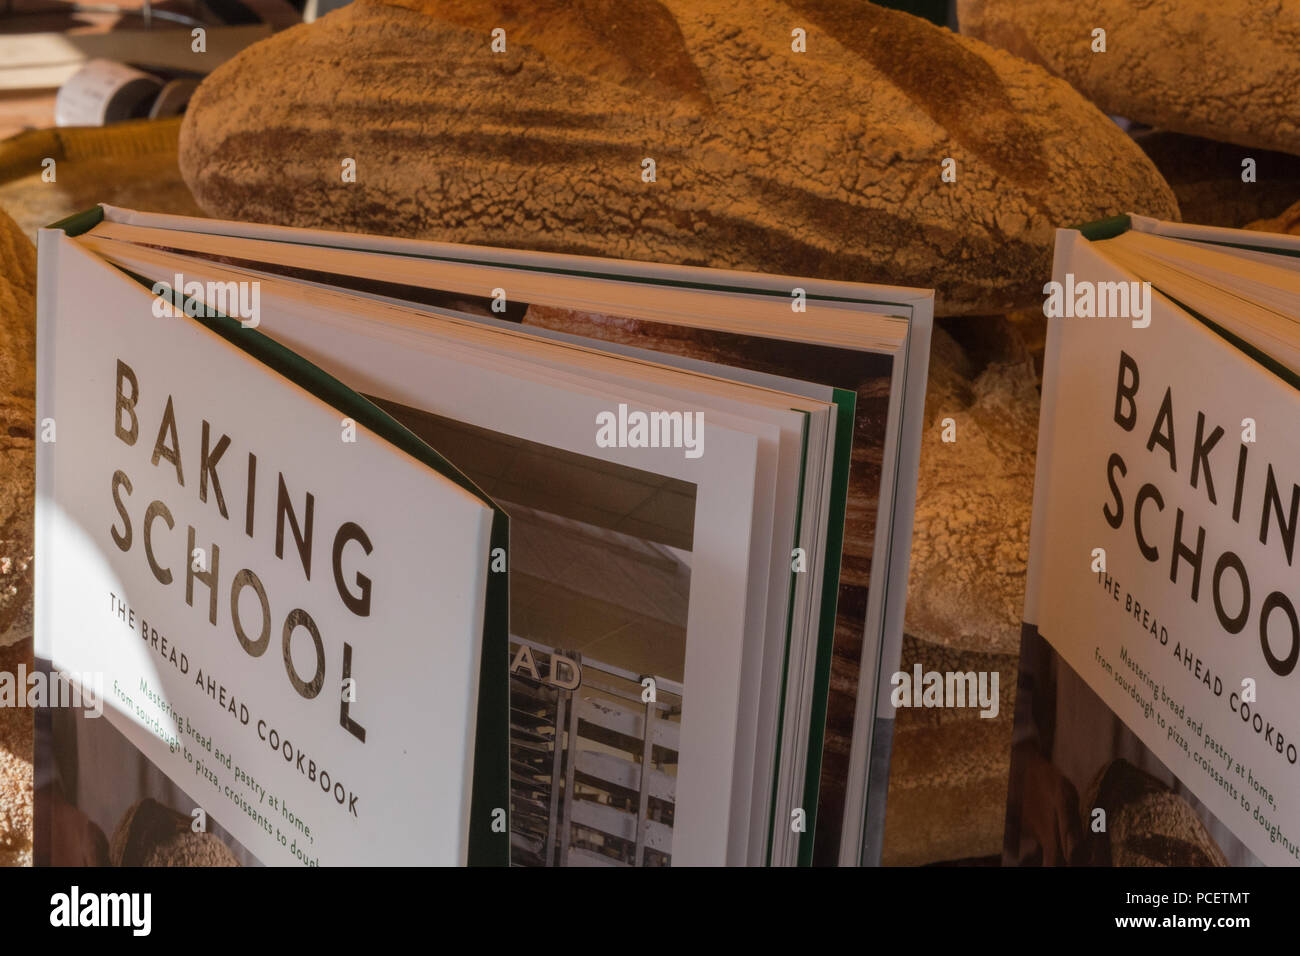 cookery and baking books and bread on sale at an artisan bakers stall on borough market in london. Stock Photo